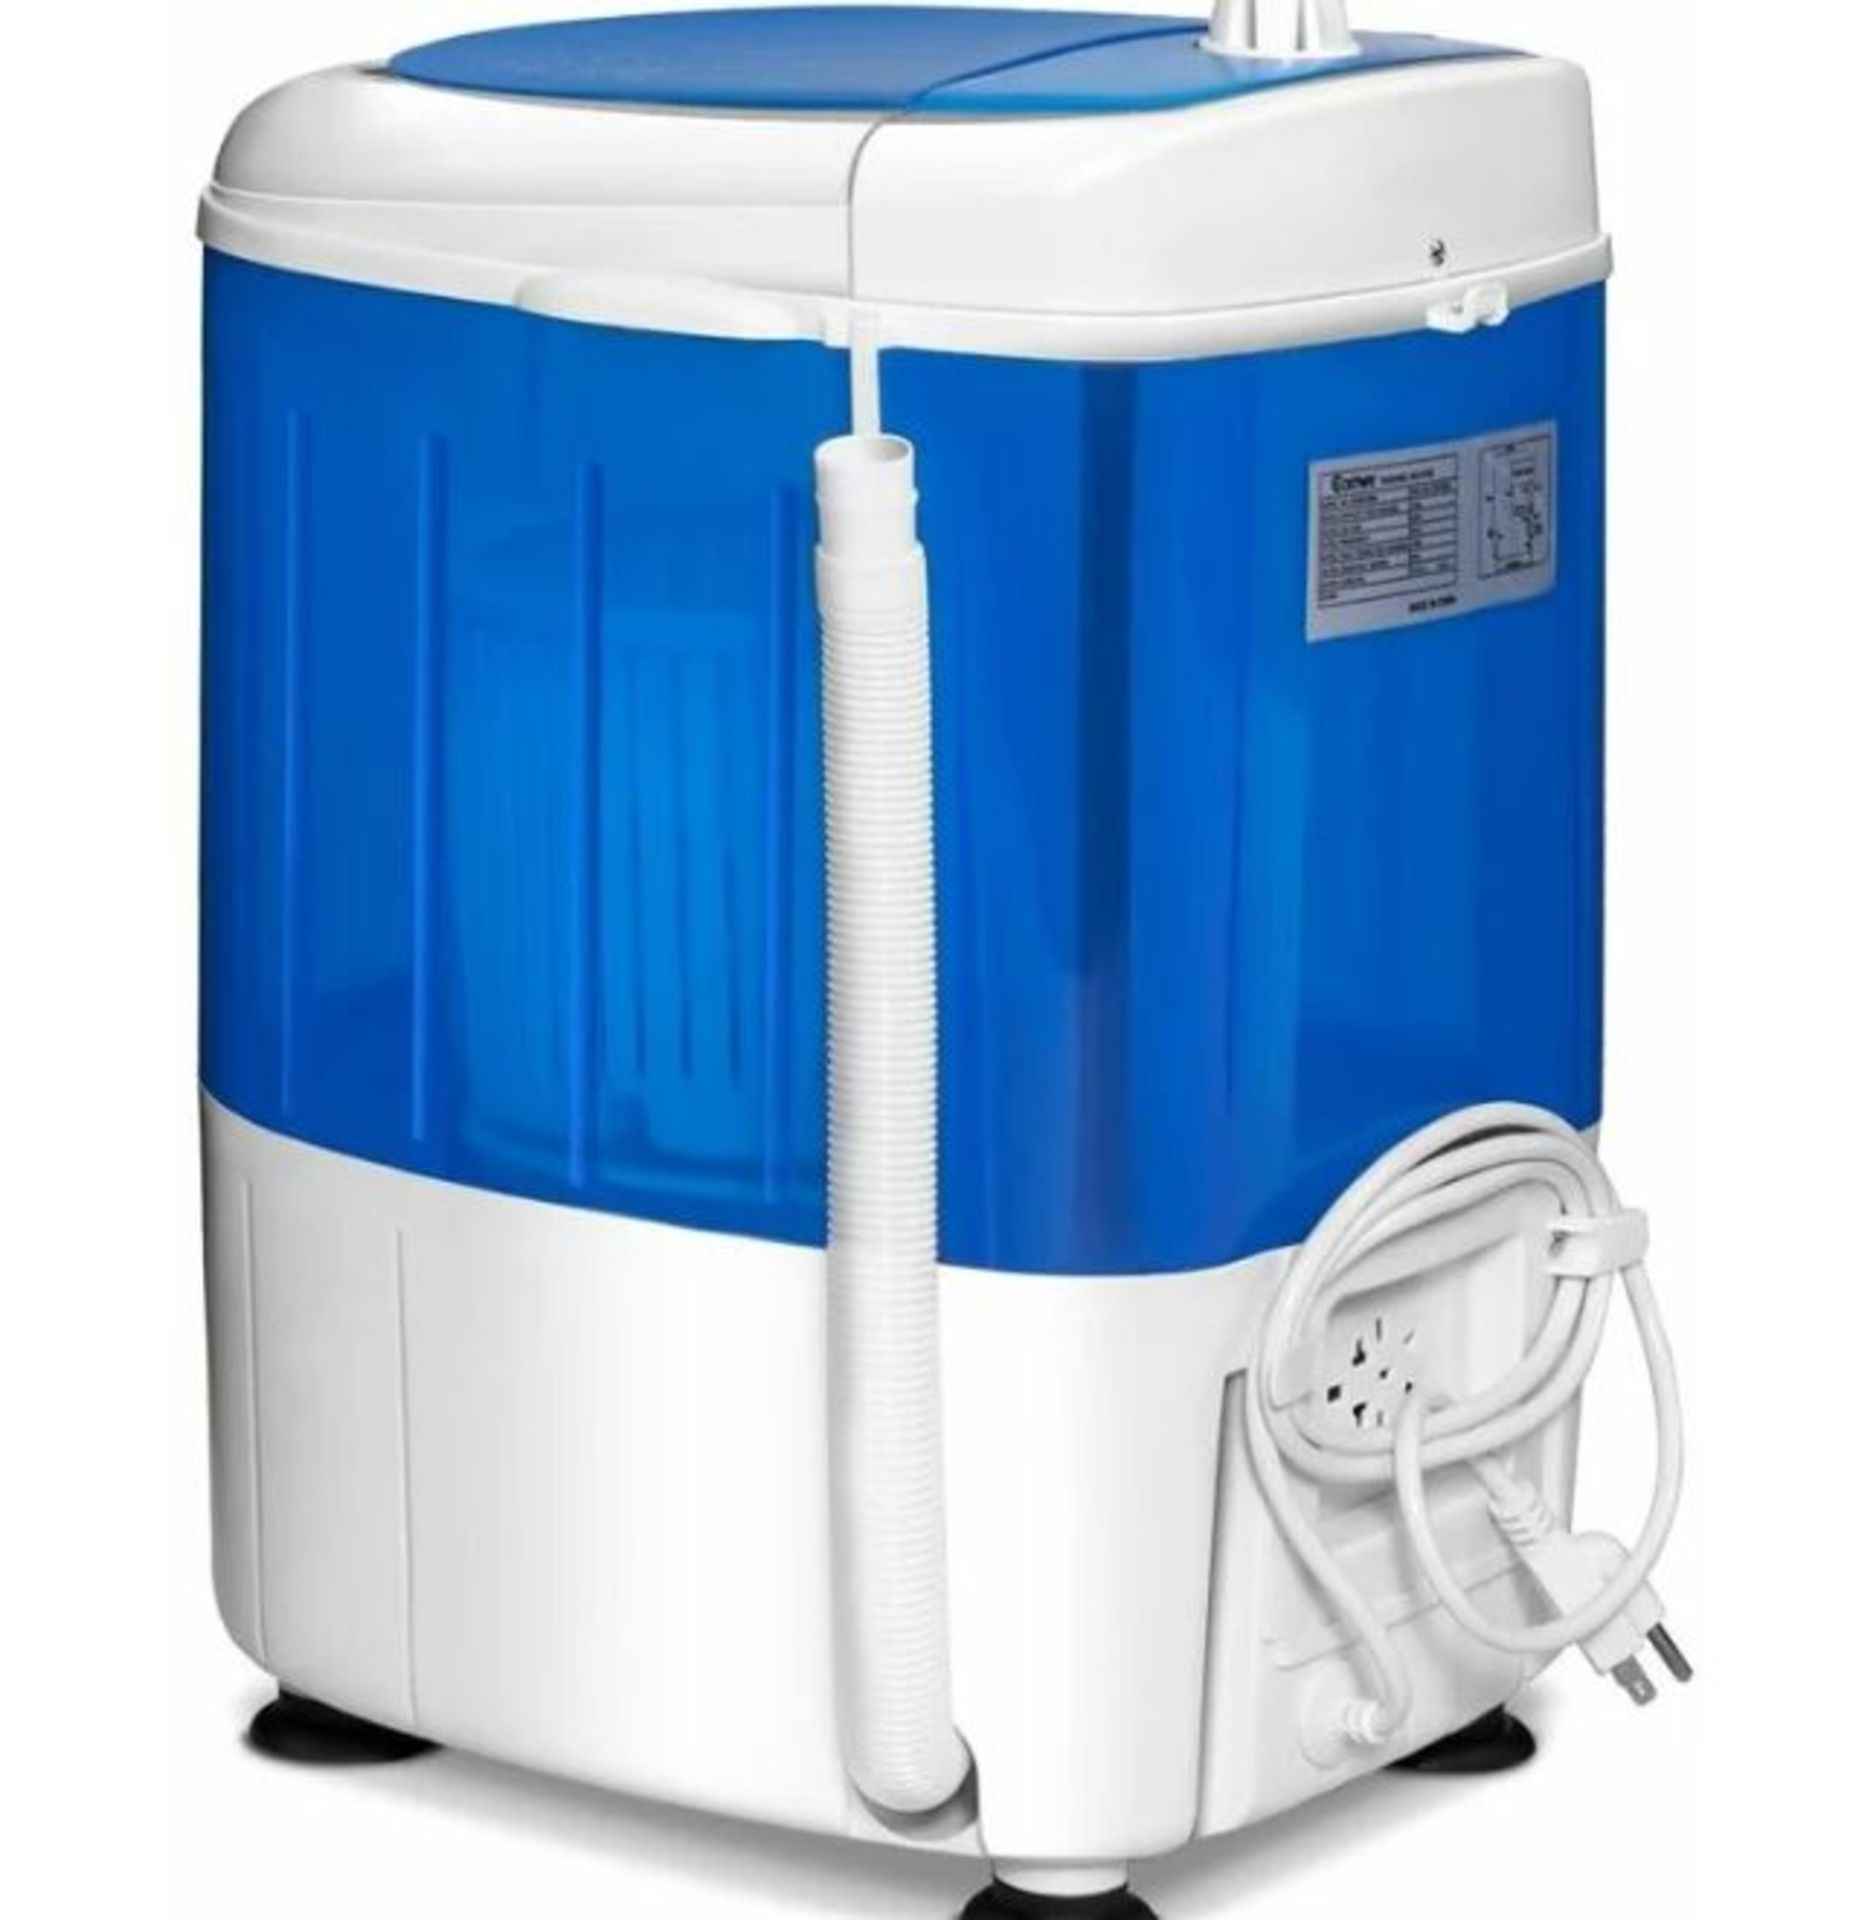 2-in-1 Mini Washing Machine Single Tub Washer and Spin Dryer W/ Timing Funtion. - ER53. Still